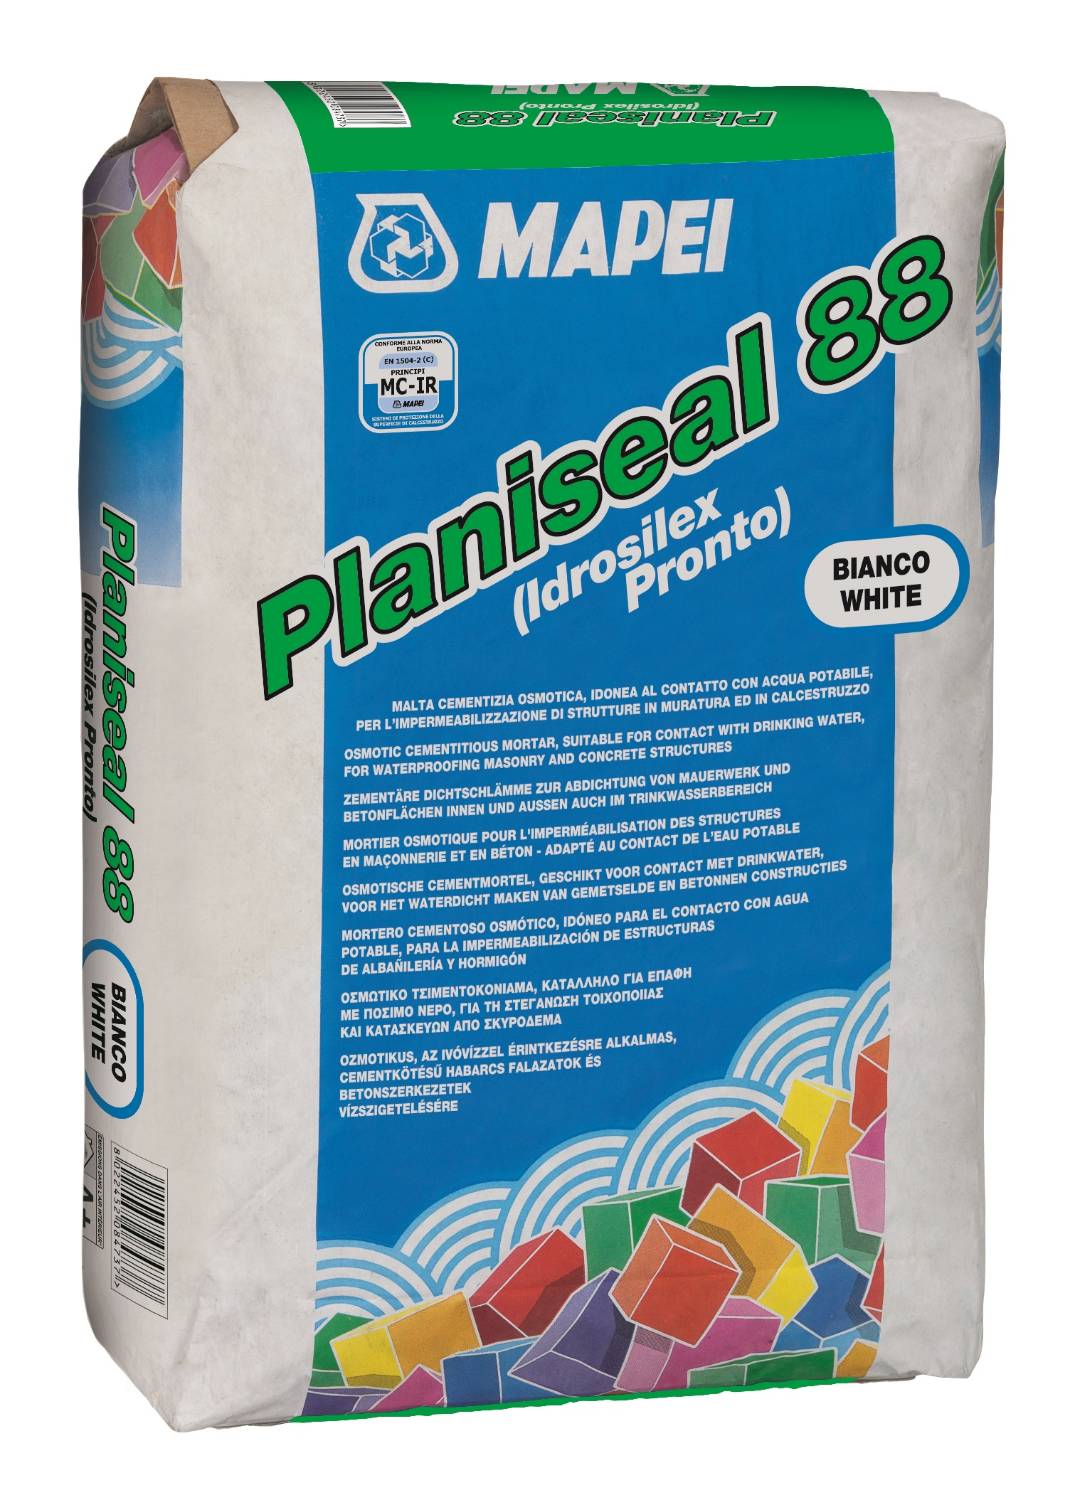 Planiseal 88 - Osmotic Cementitious Mortar